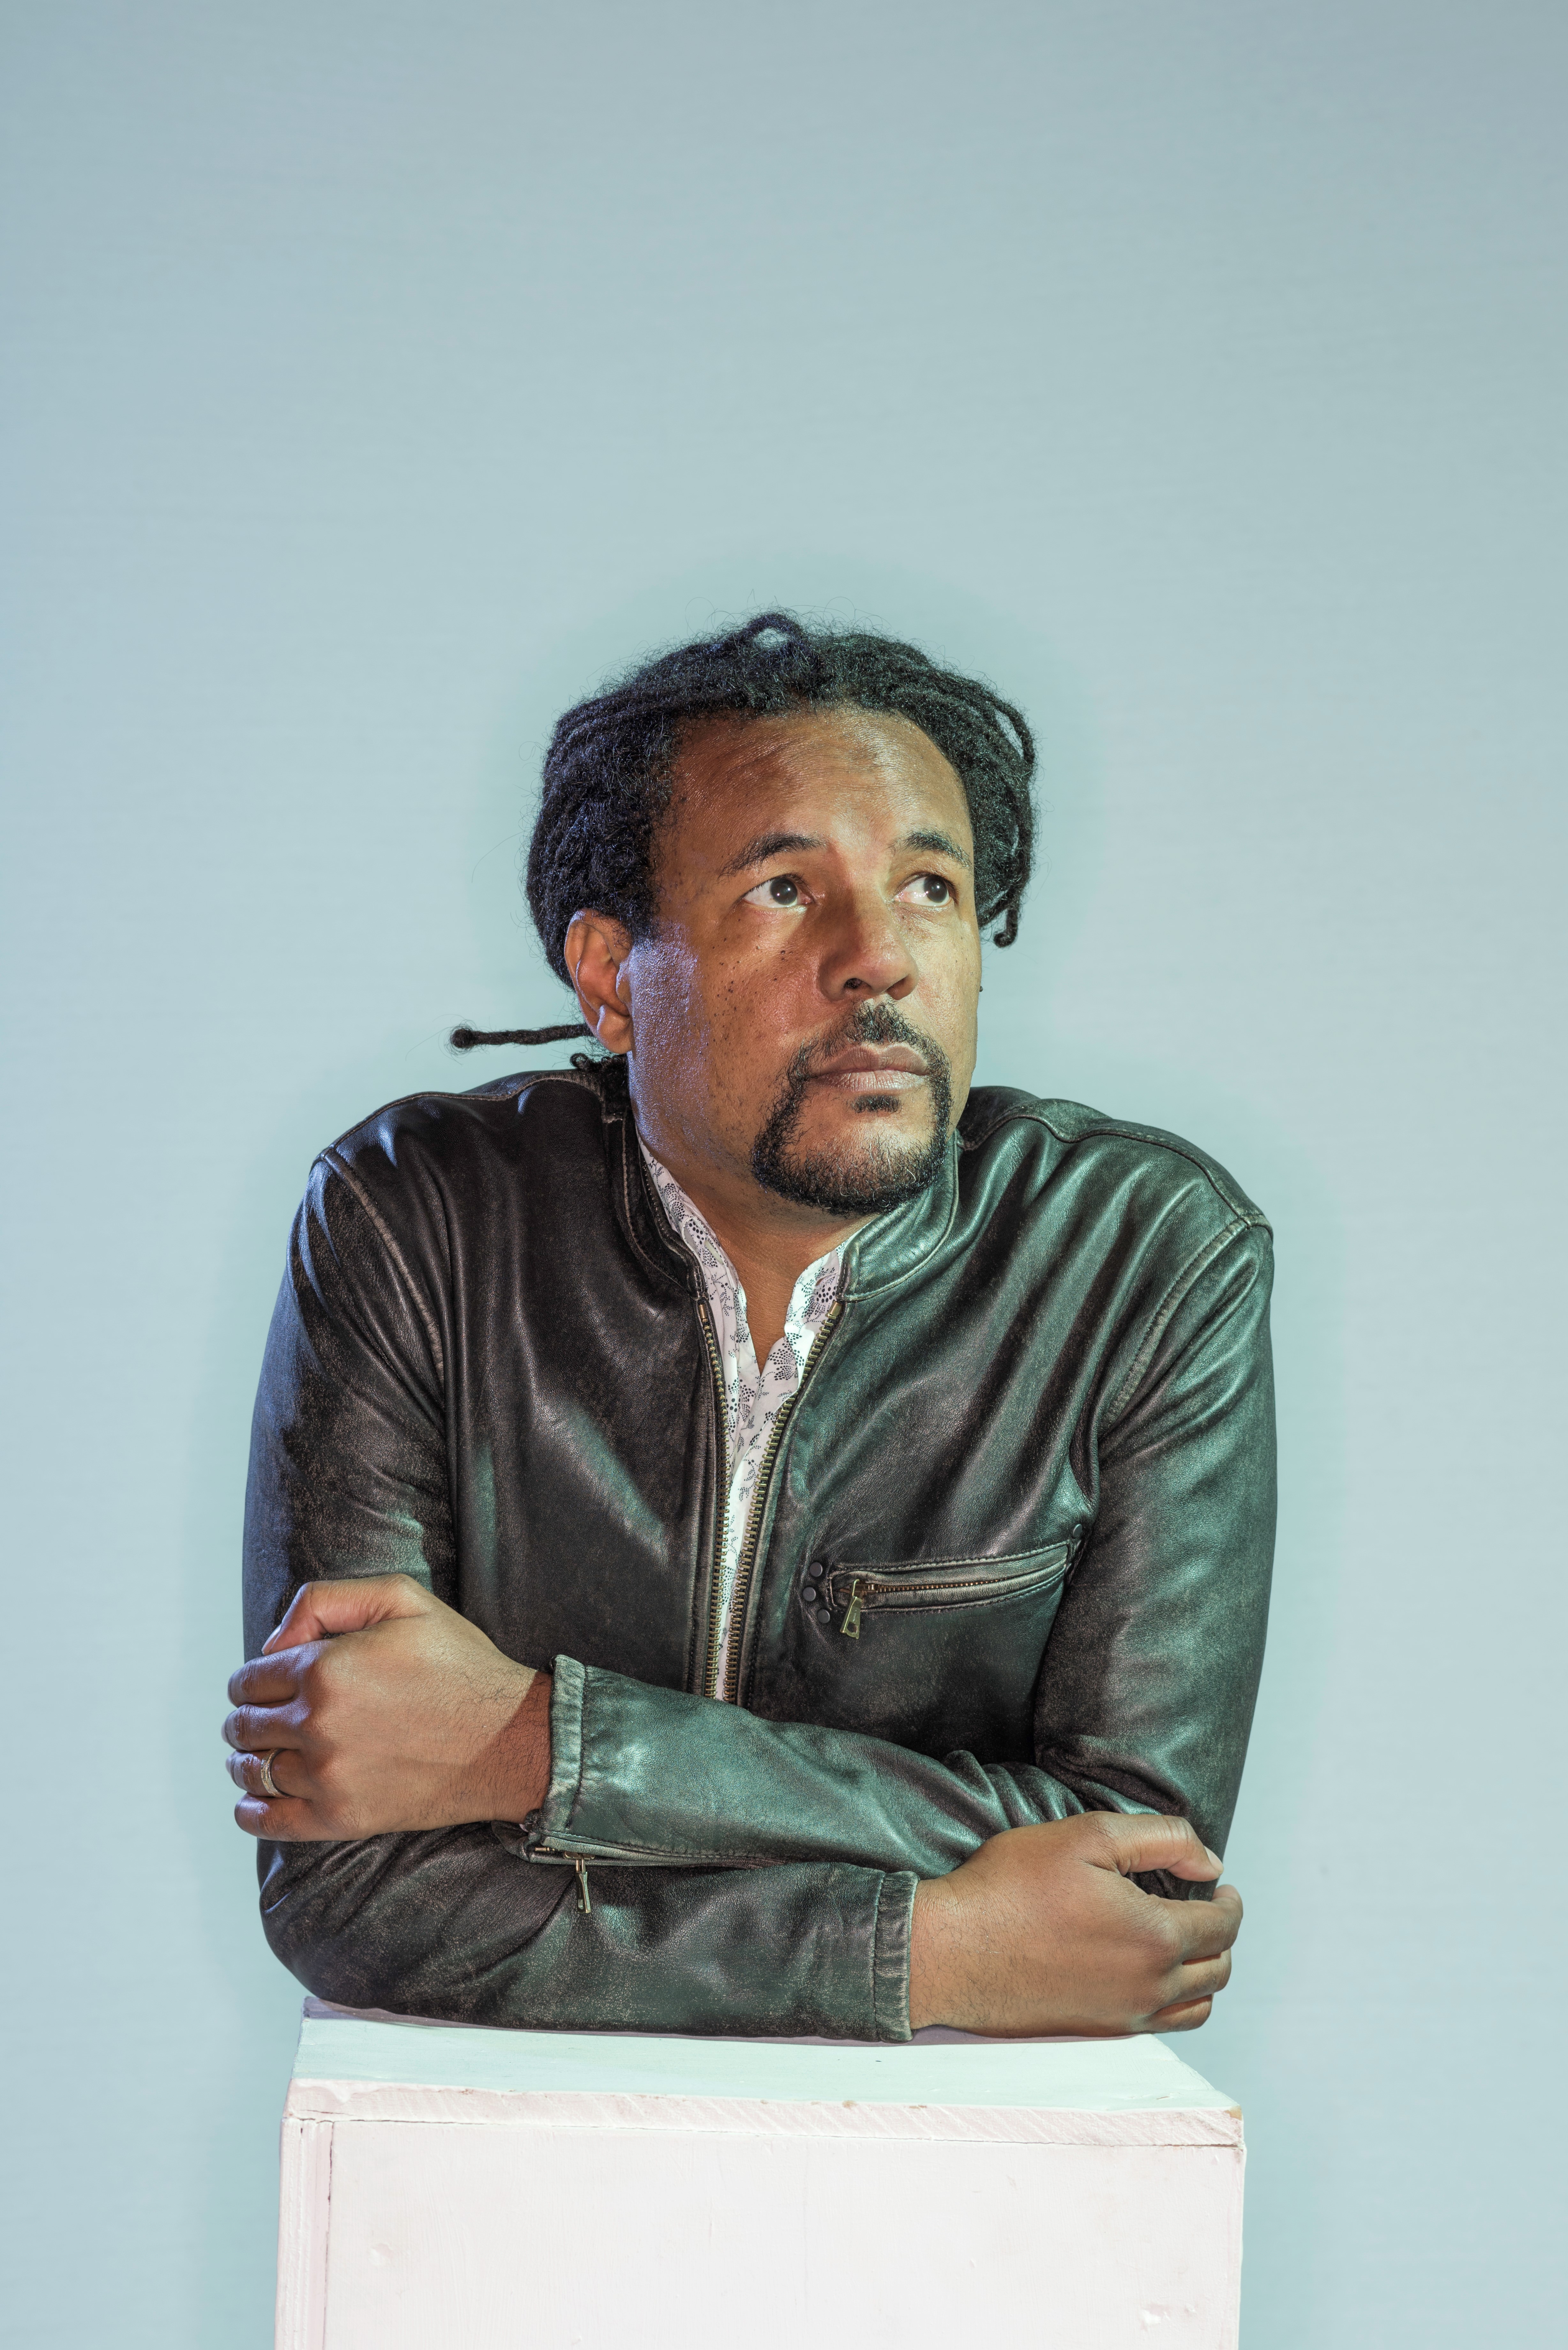 Author Colson Whitehead arms resting on podium, looking up and off to right